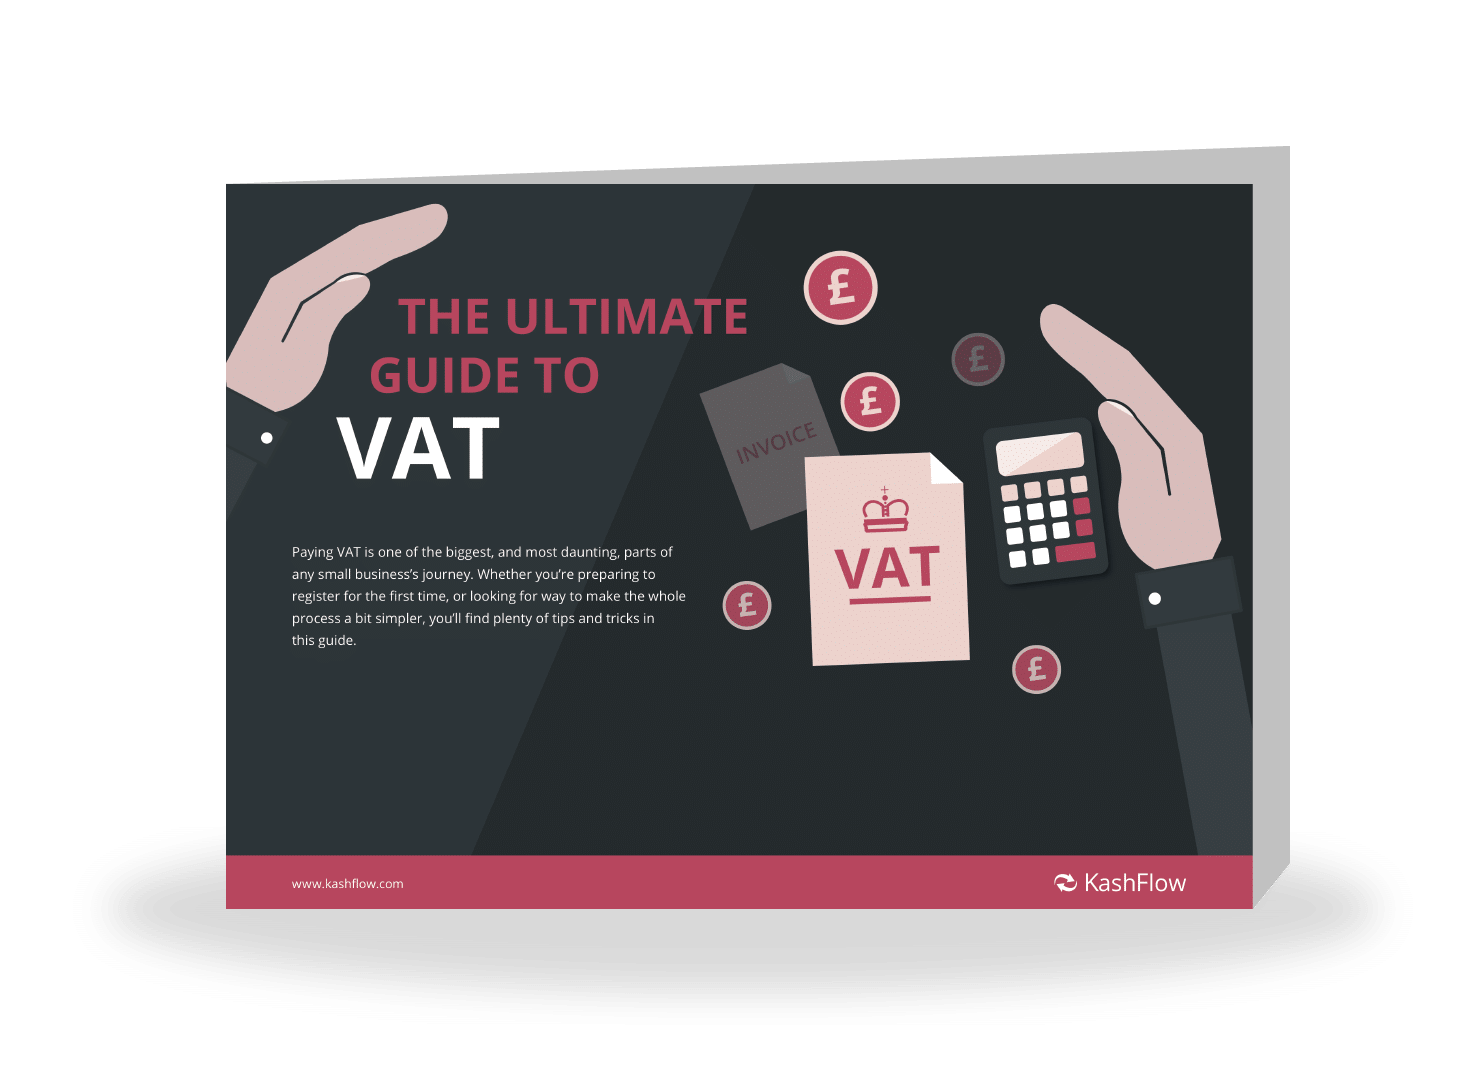 The Ultimate Guide to VAT